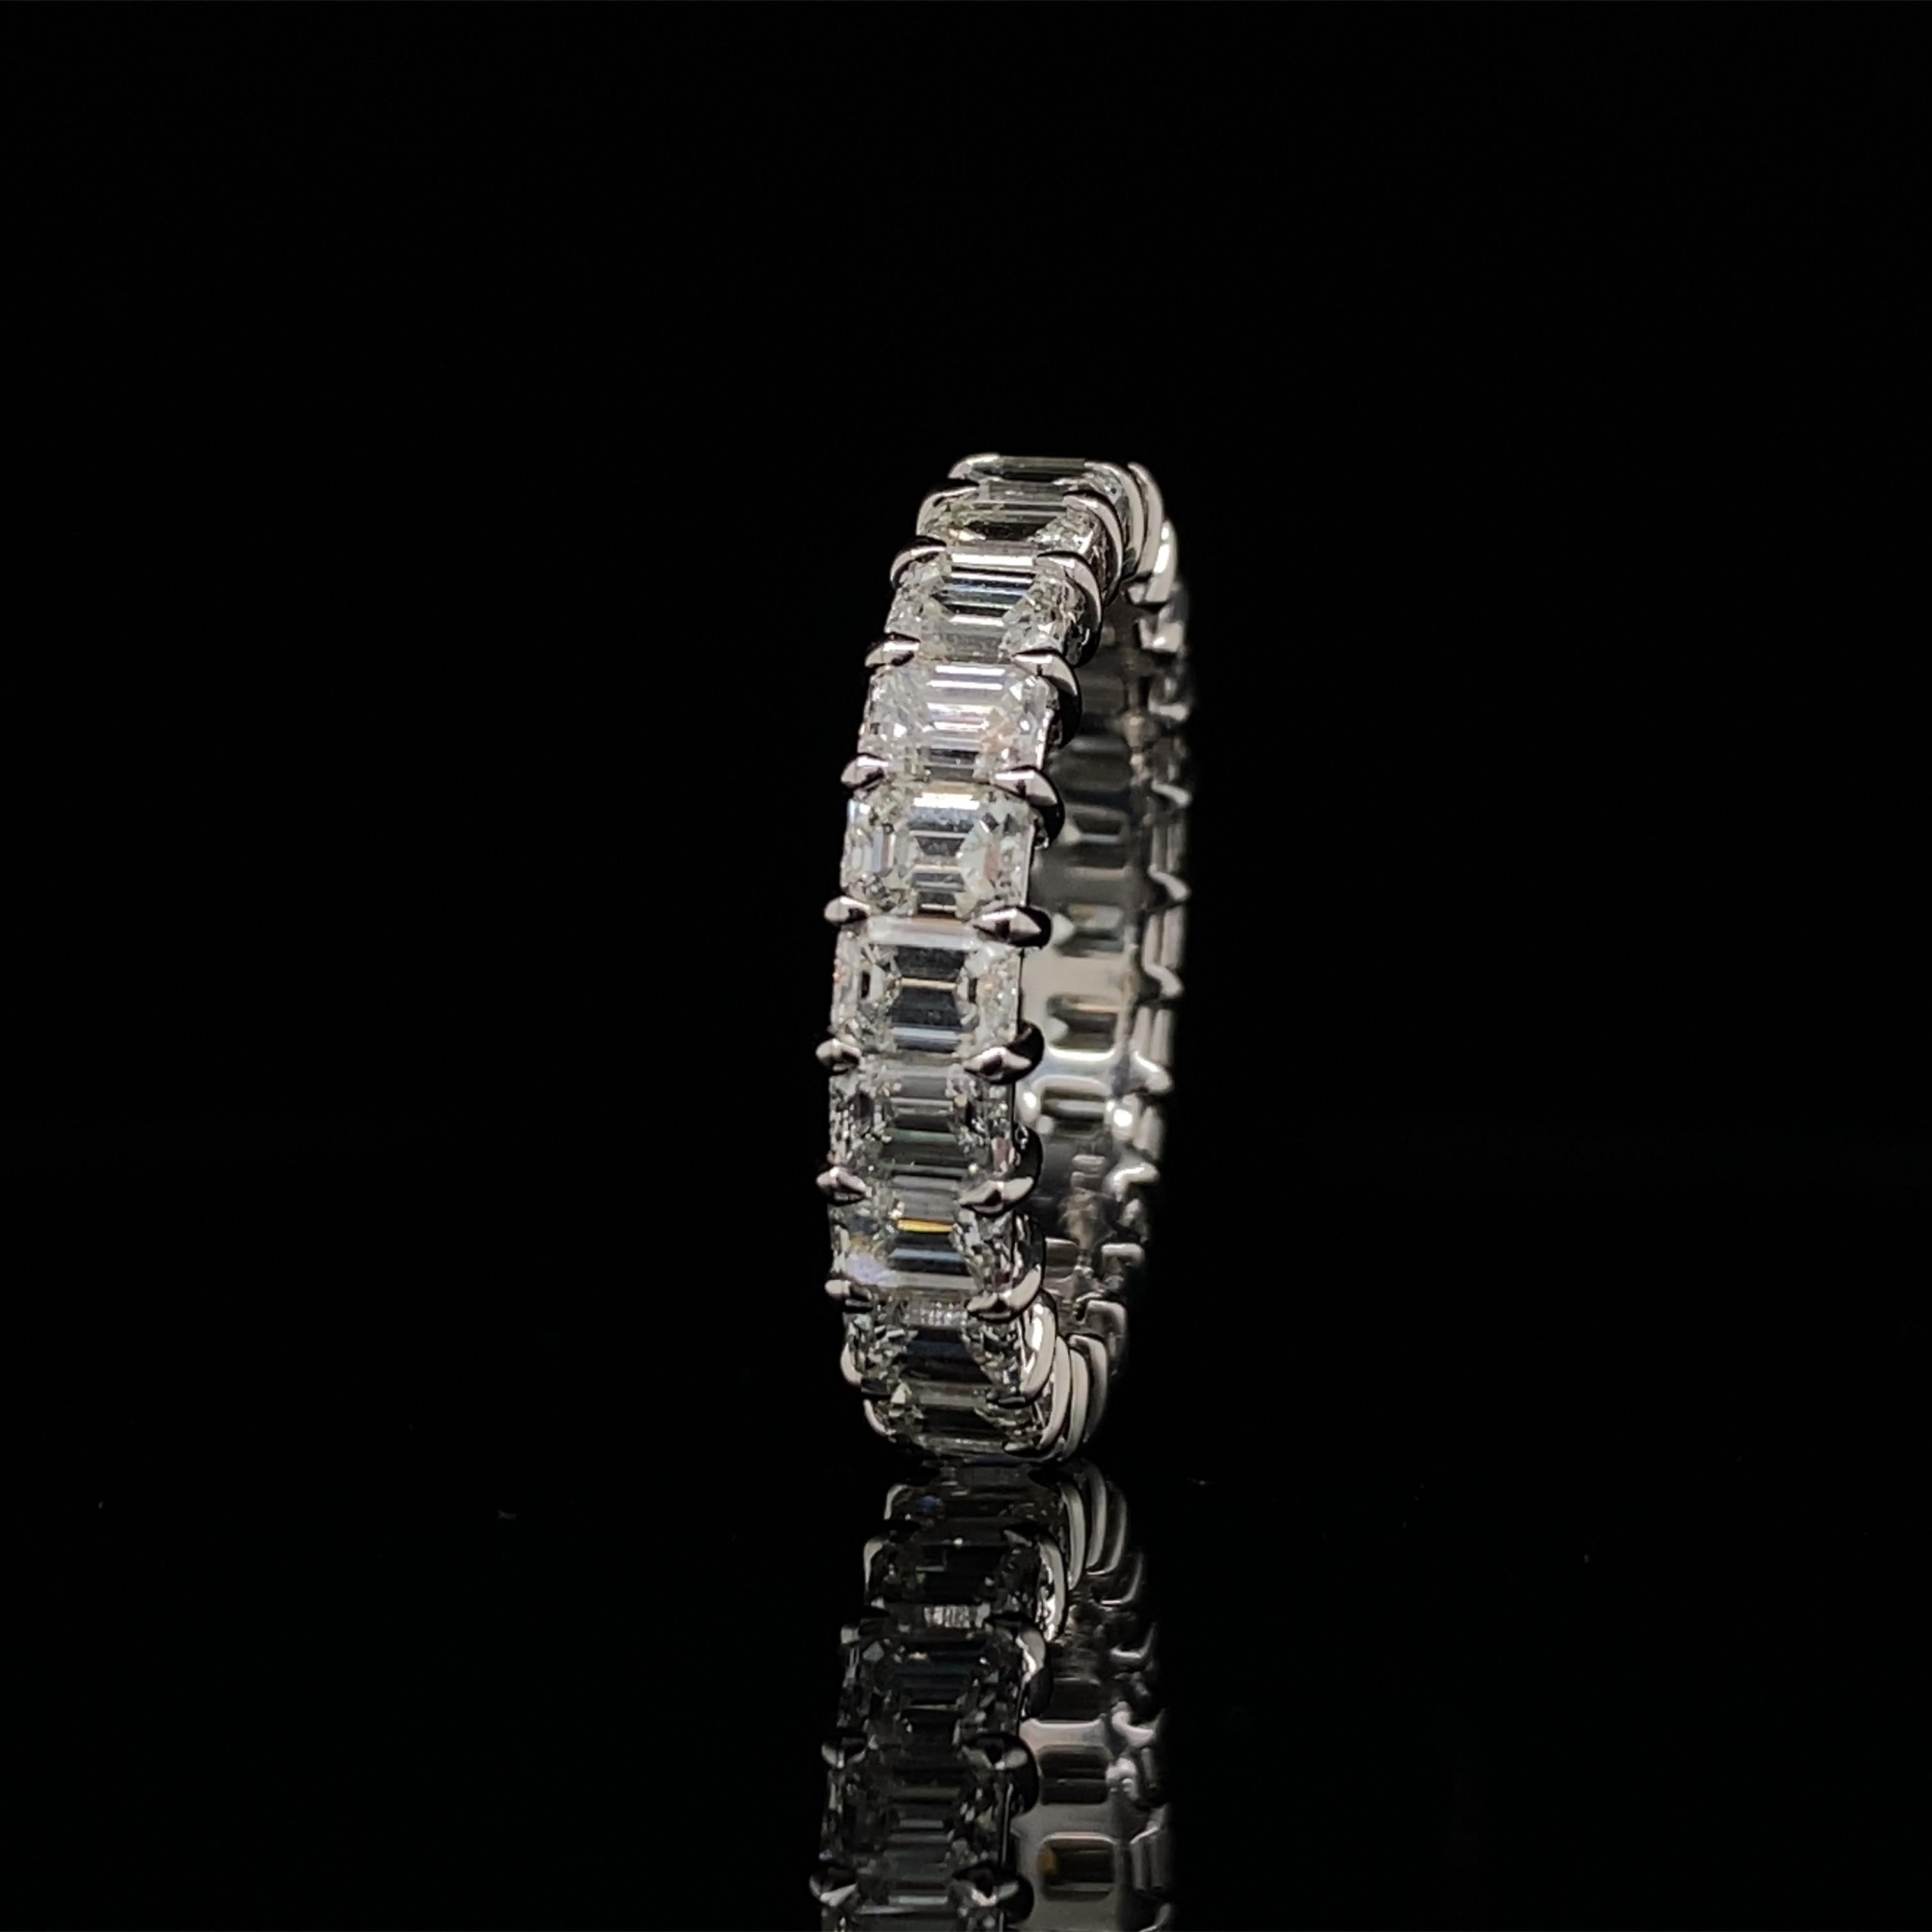 This Emerald cut diamond ring has 24 Emerald cut diamonds with a total carat of 4.51.
The diamonds are I Color, VS clarity. The ring is a finger size 6 and is set platinum.